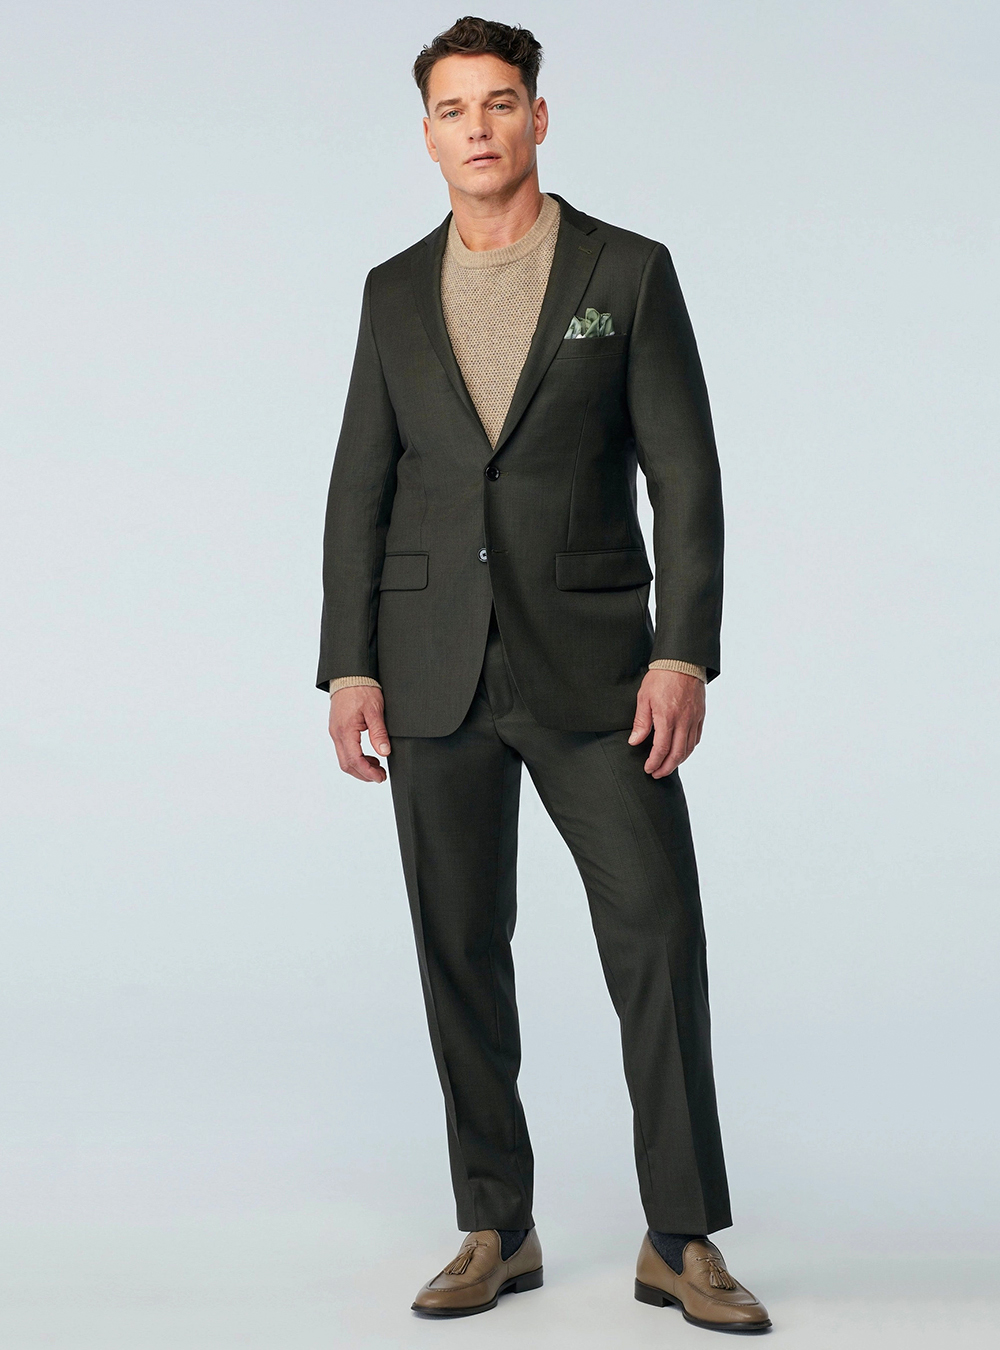 Green suit, beige crew-neck sweater and tan loafers